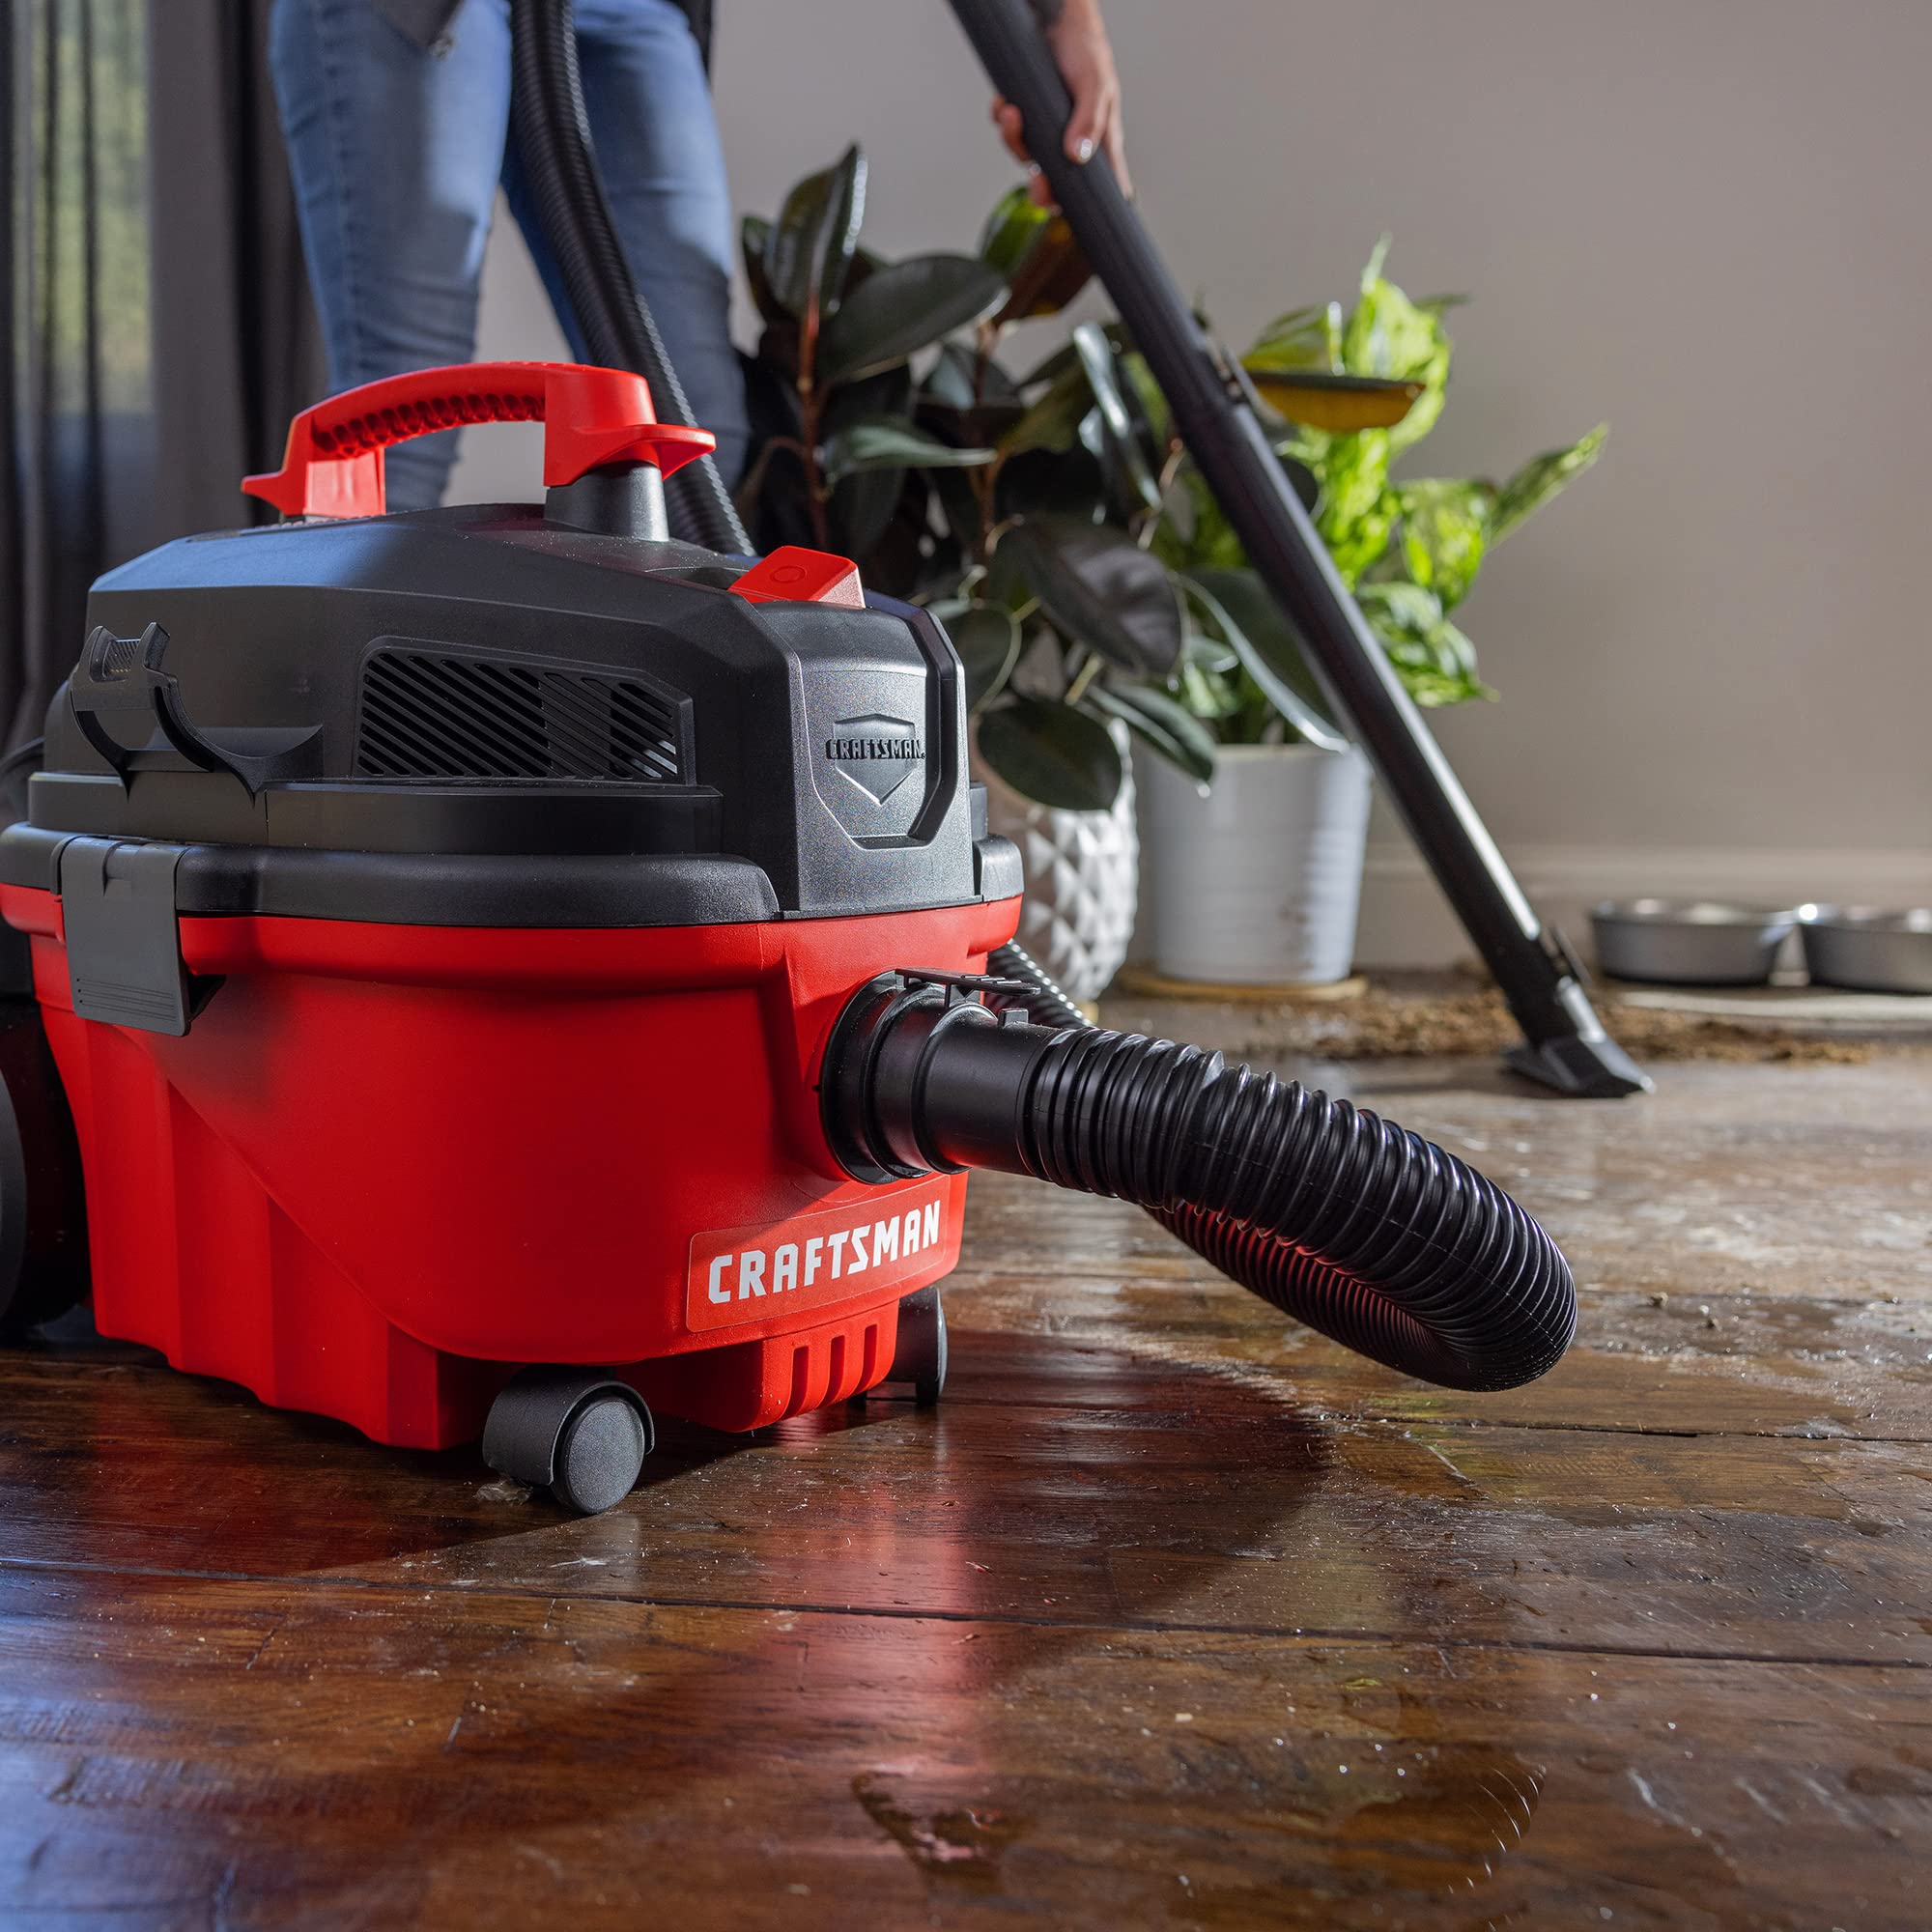 CRAFTSMAN CMXEVBE17040 4 Gallon 5.0 Peak HP Wet/Dry Vac, Portable Shop Vacuum with Attachments, Red